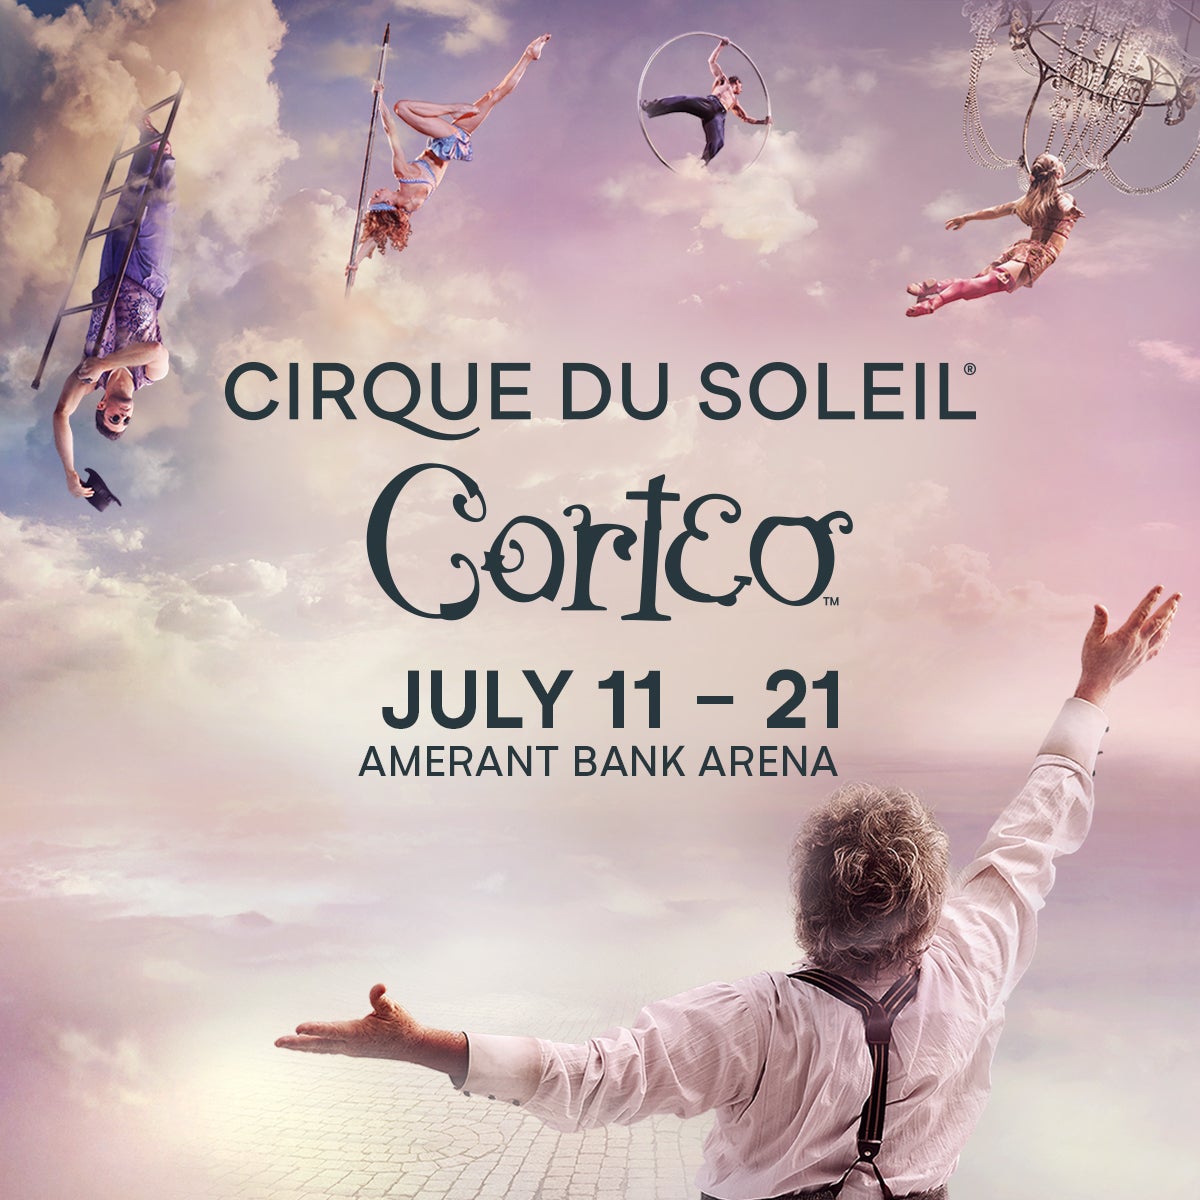 More Info for Cirque du Soleil is Coming Back to South Florida at Amerant Bank Arena with one of its best-loved productions CORTEO